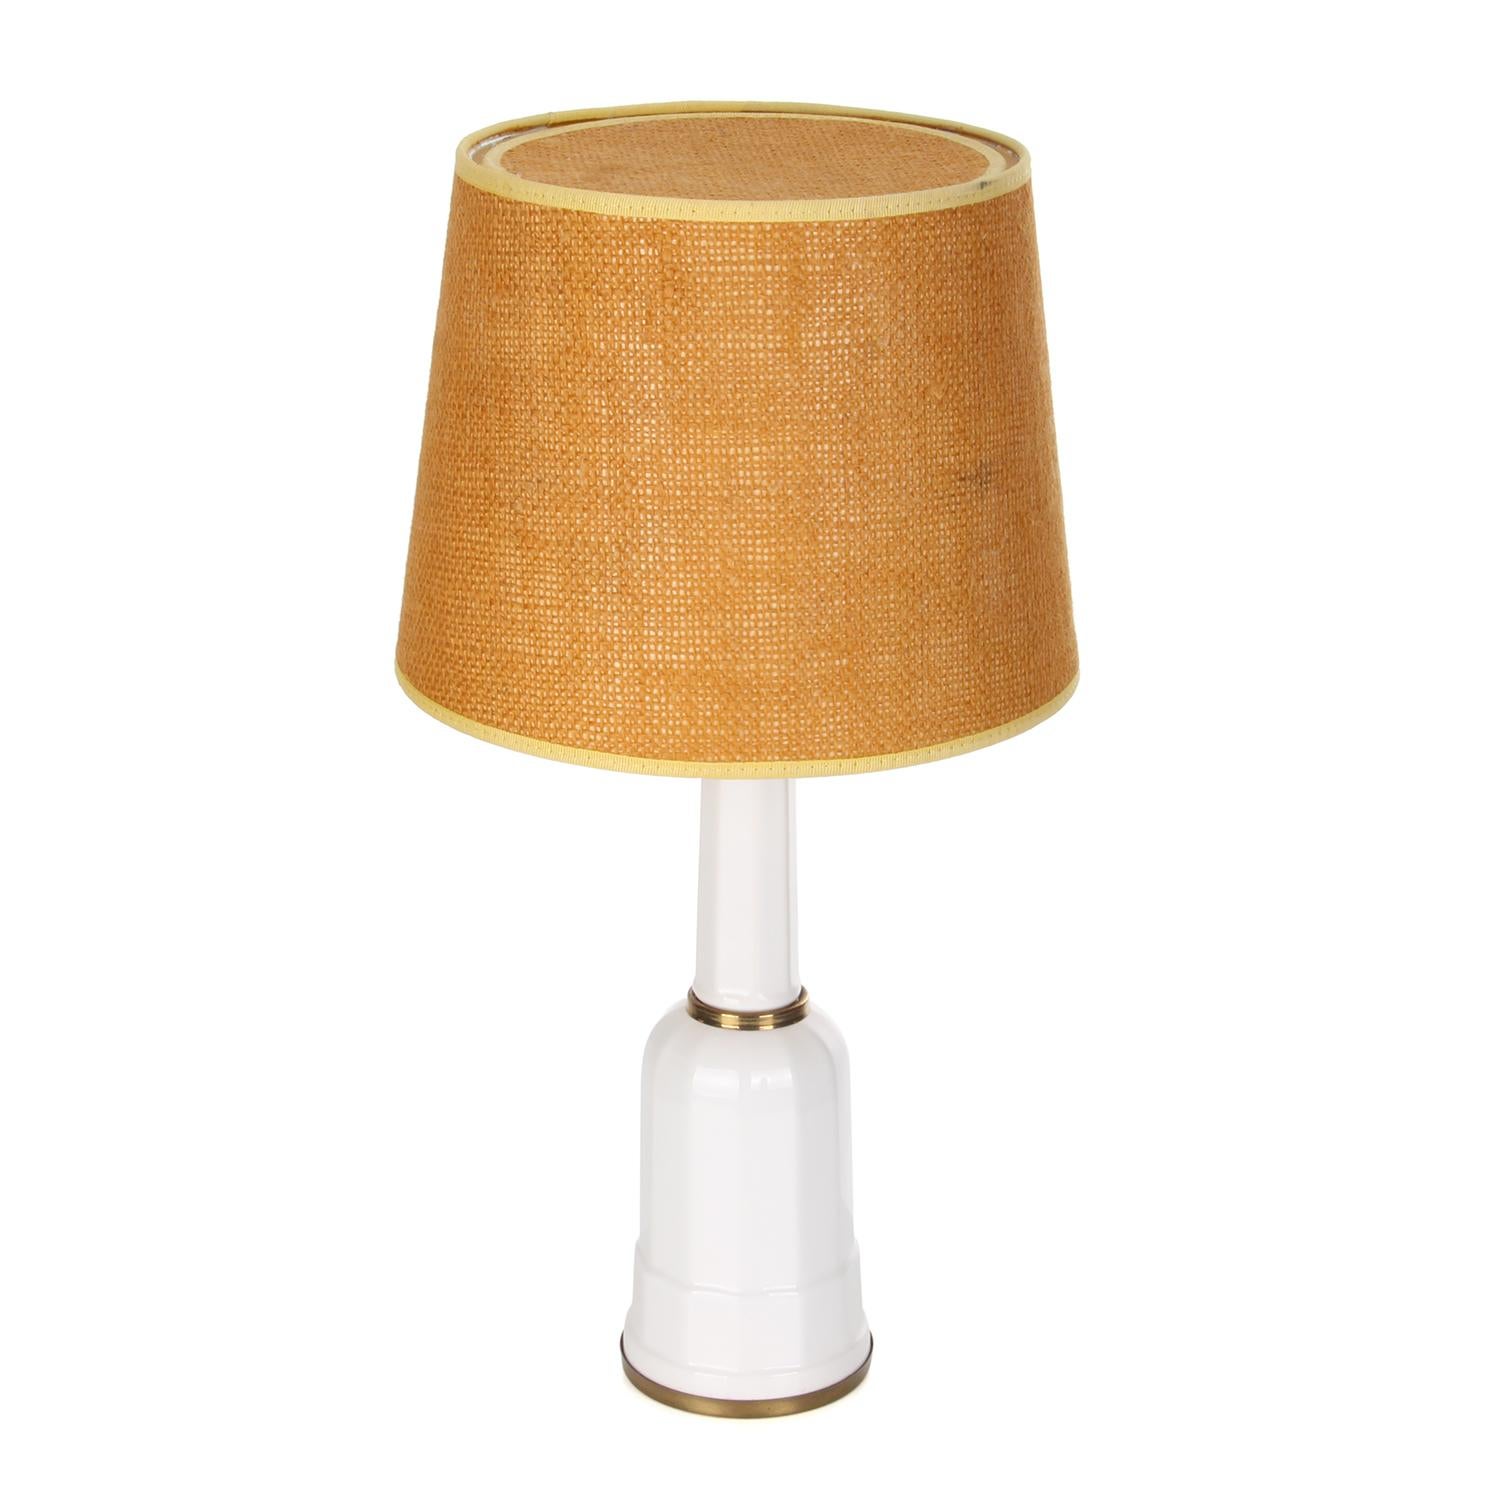 HEIBERG TABLE LIGHT by Soholm in the 1960s - with vintage hessian shade included In Good Condition In Brondby, Copenhagen